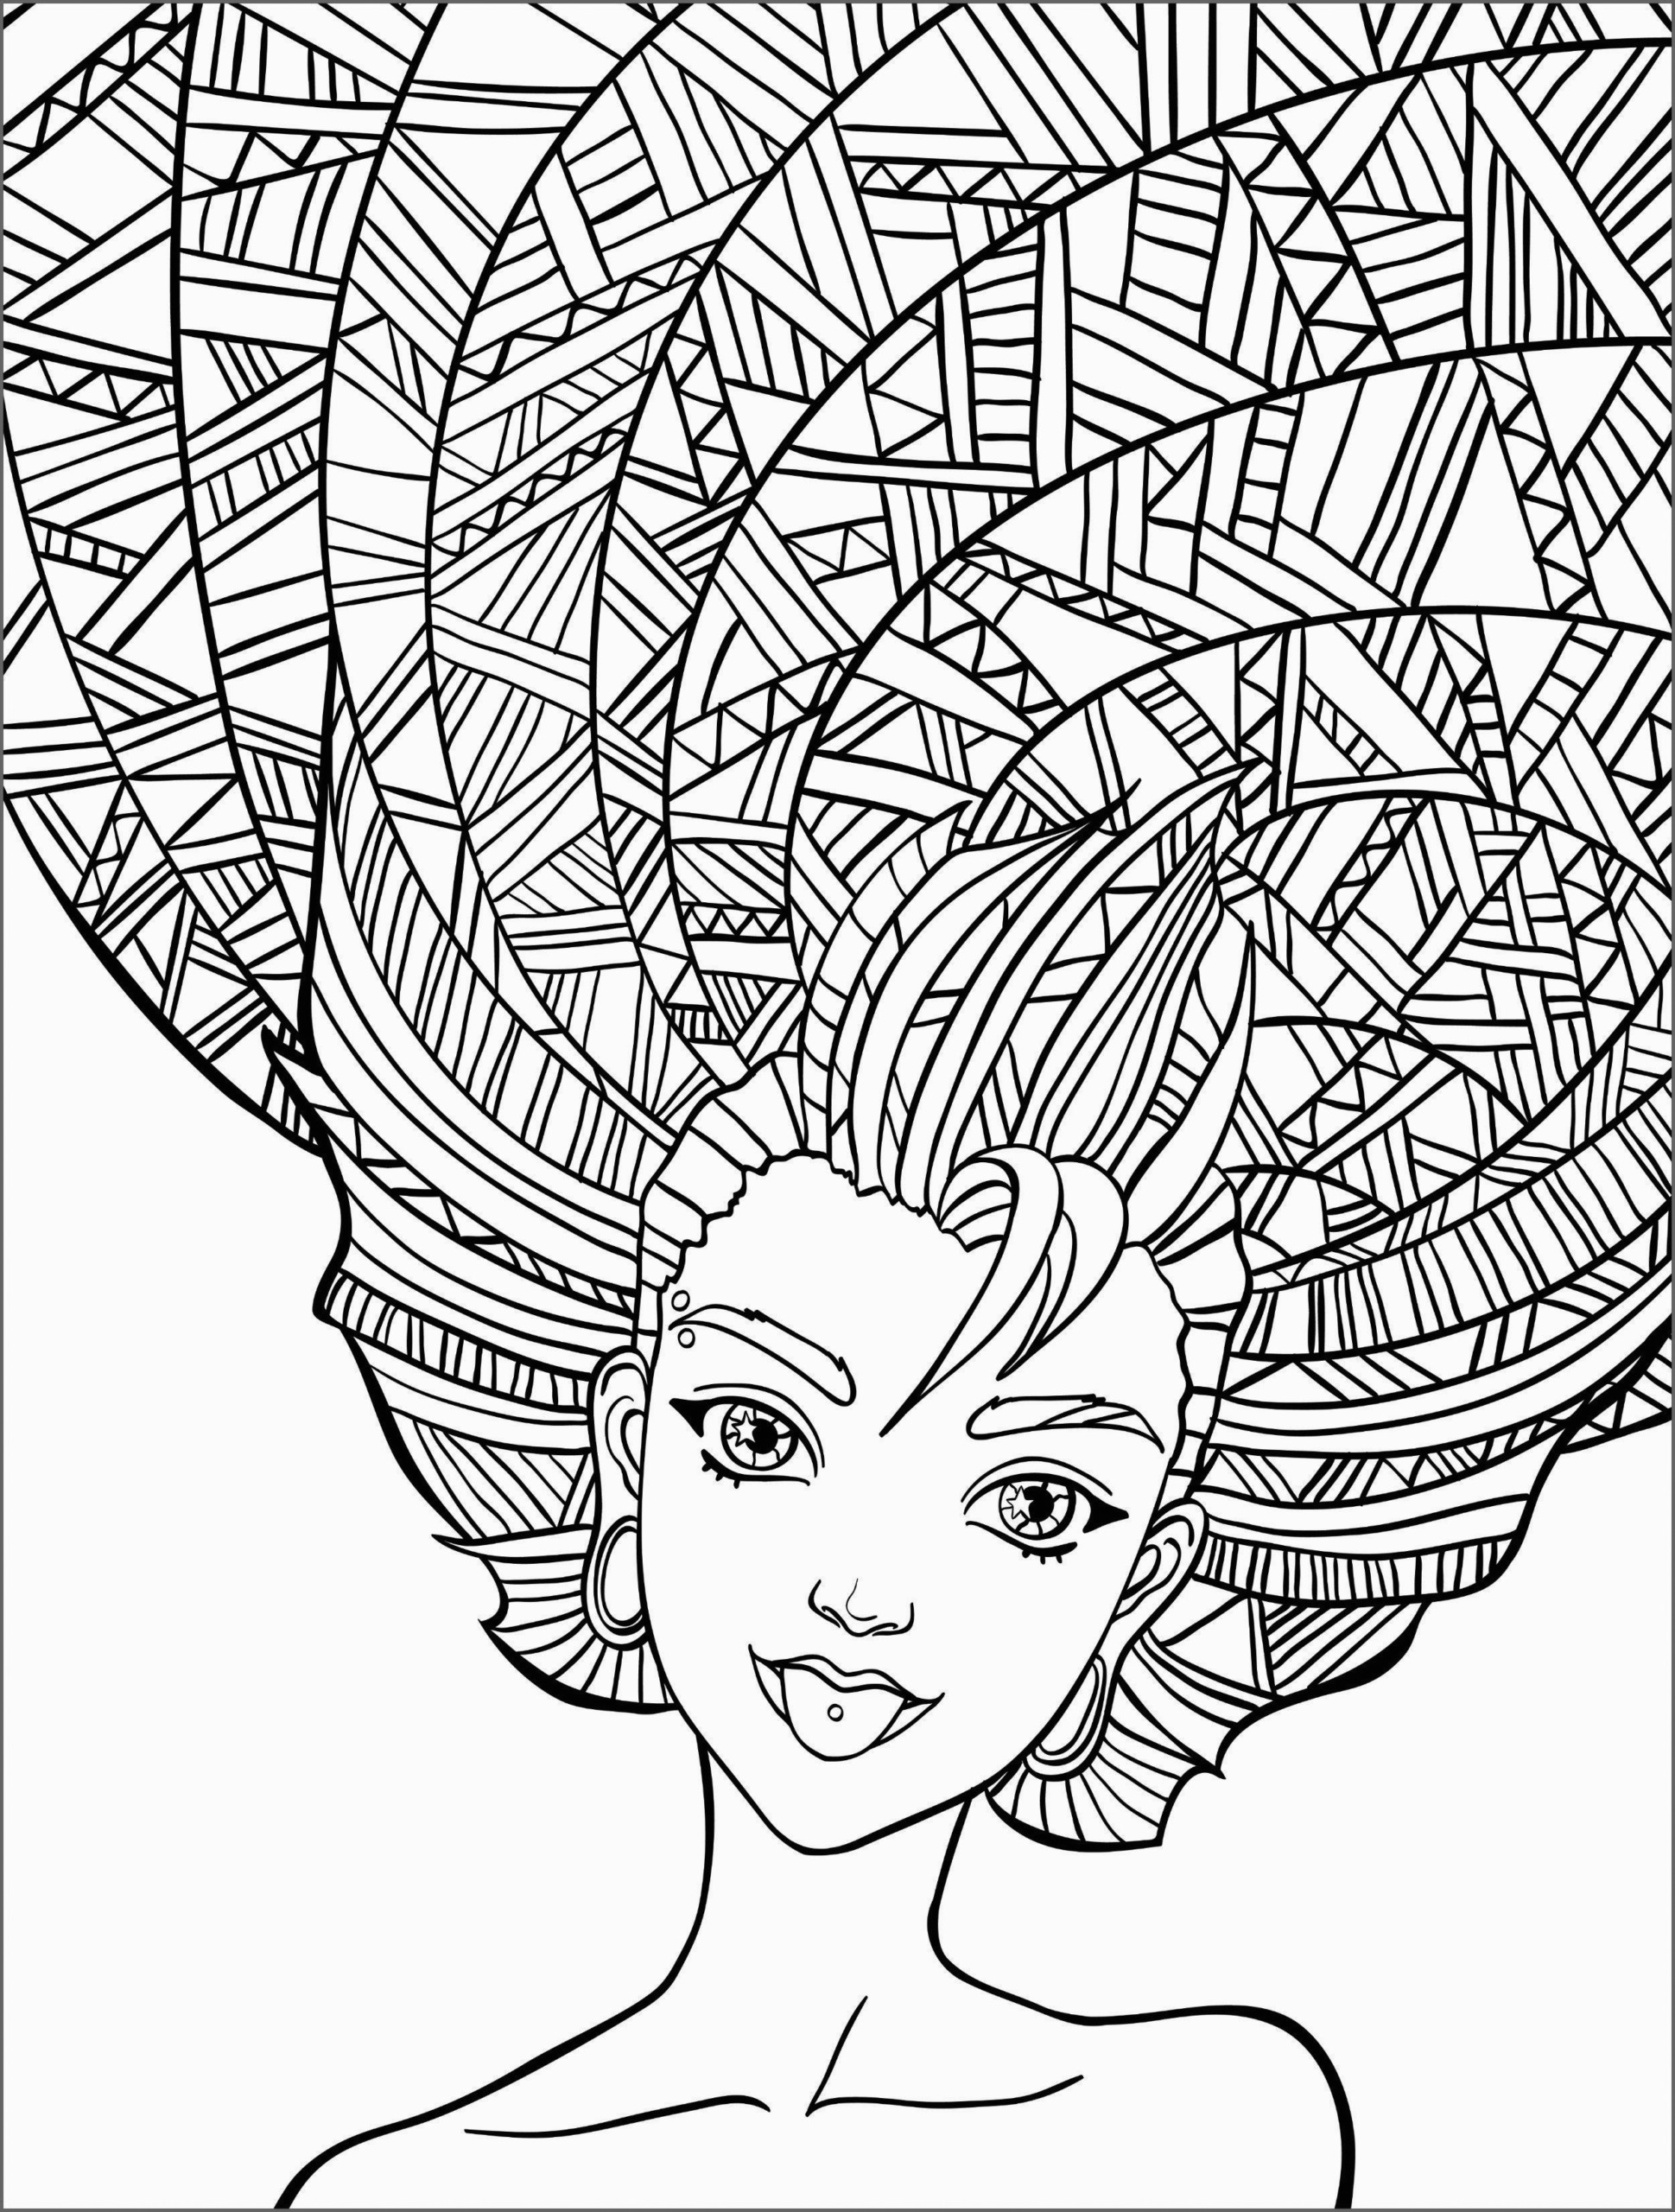 Coloring Pages For Adults Best Coloring Pages For Kids